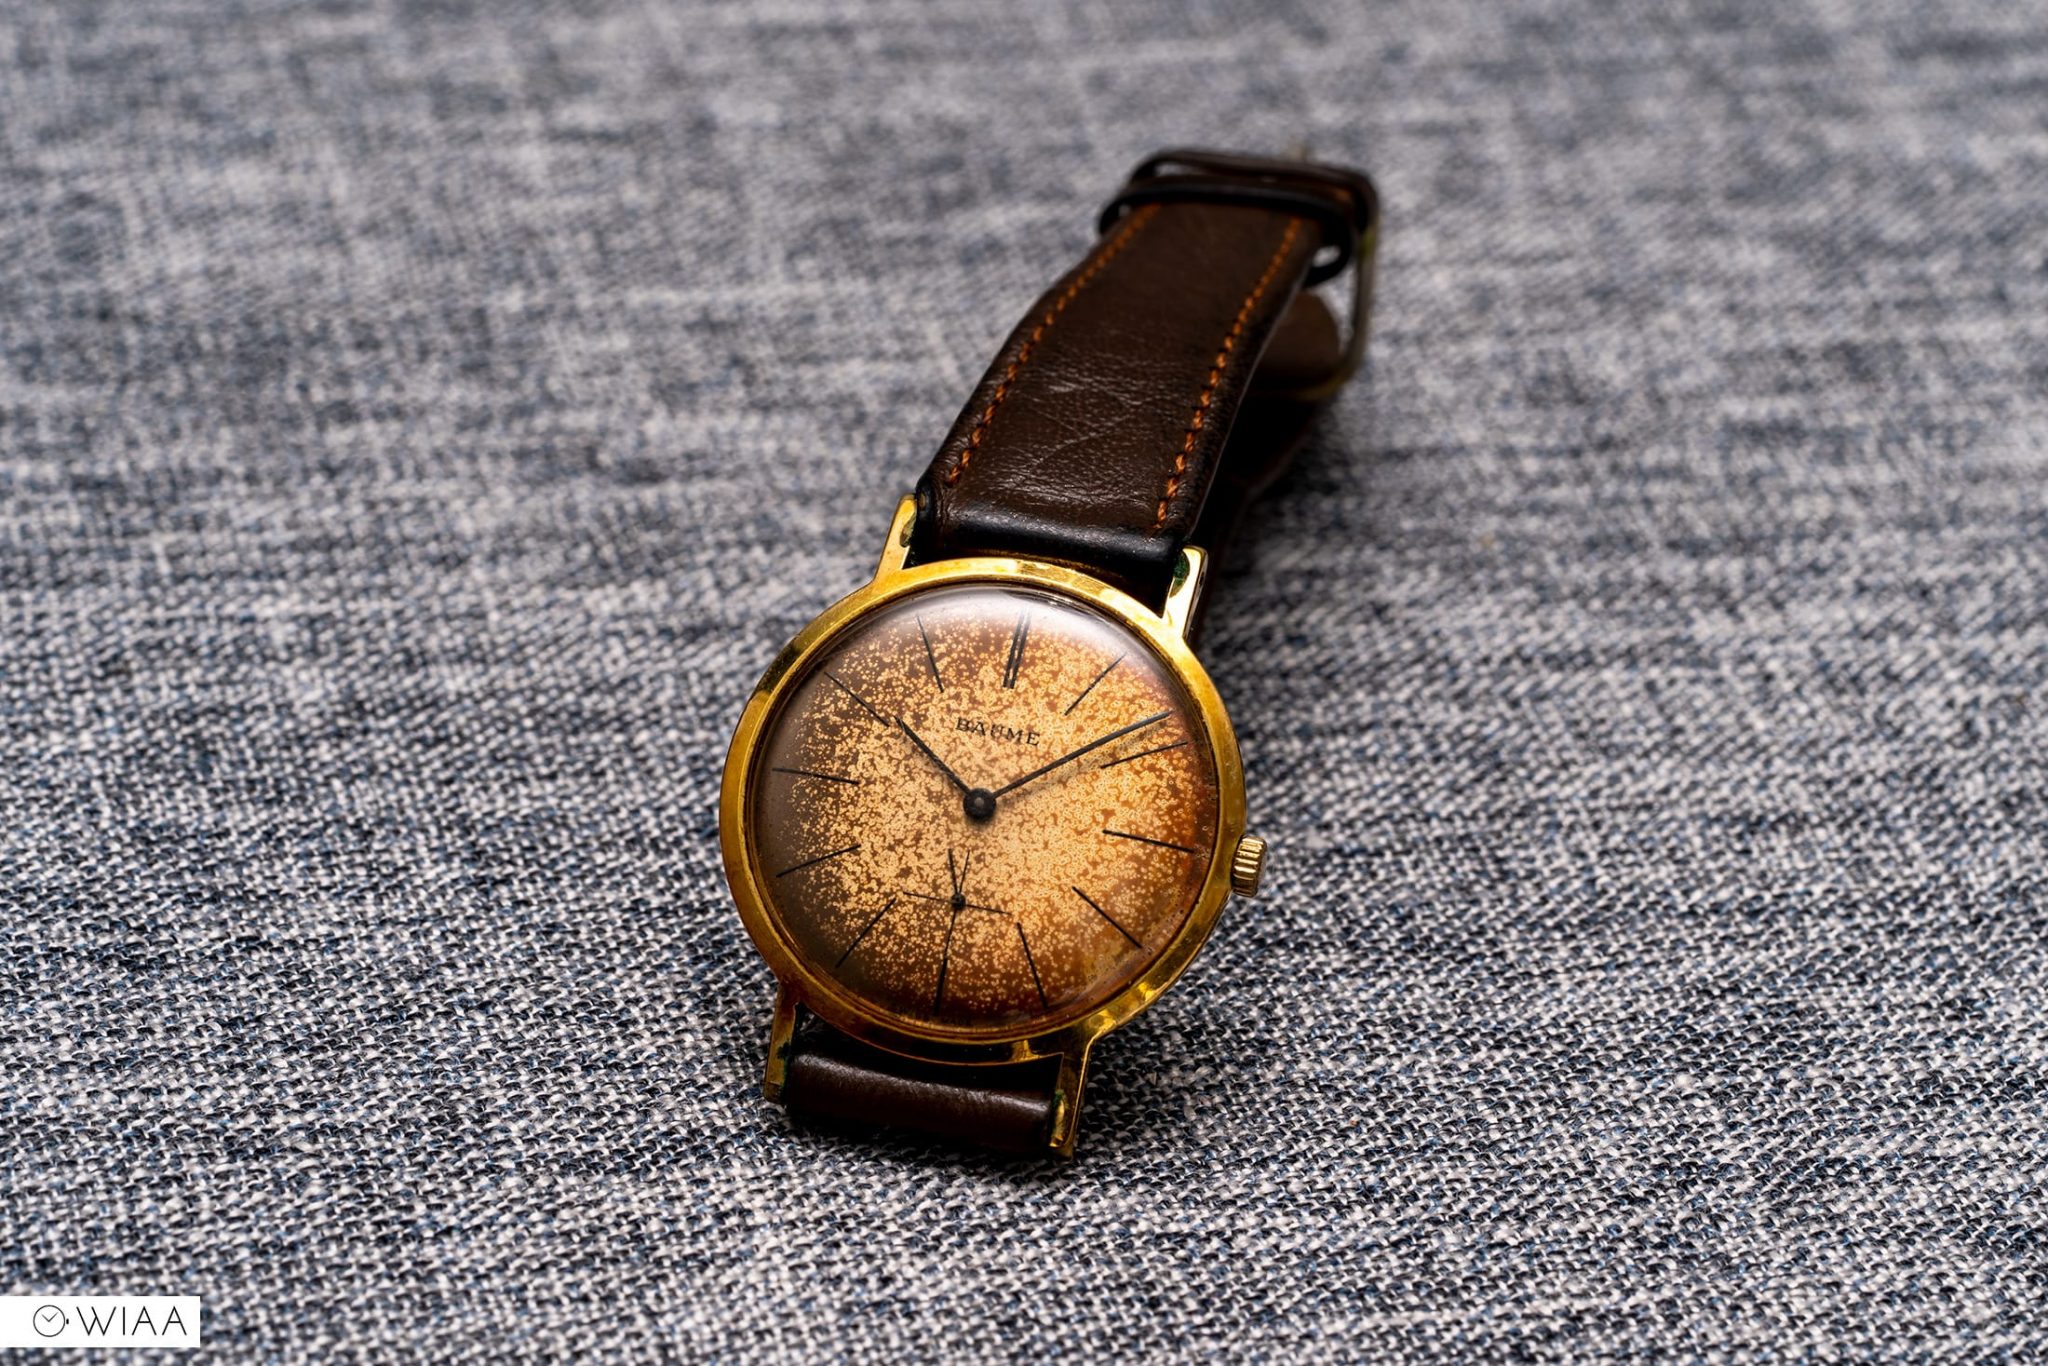 Ultimate guide: buying vintage / used watches on Chrono24